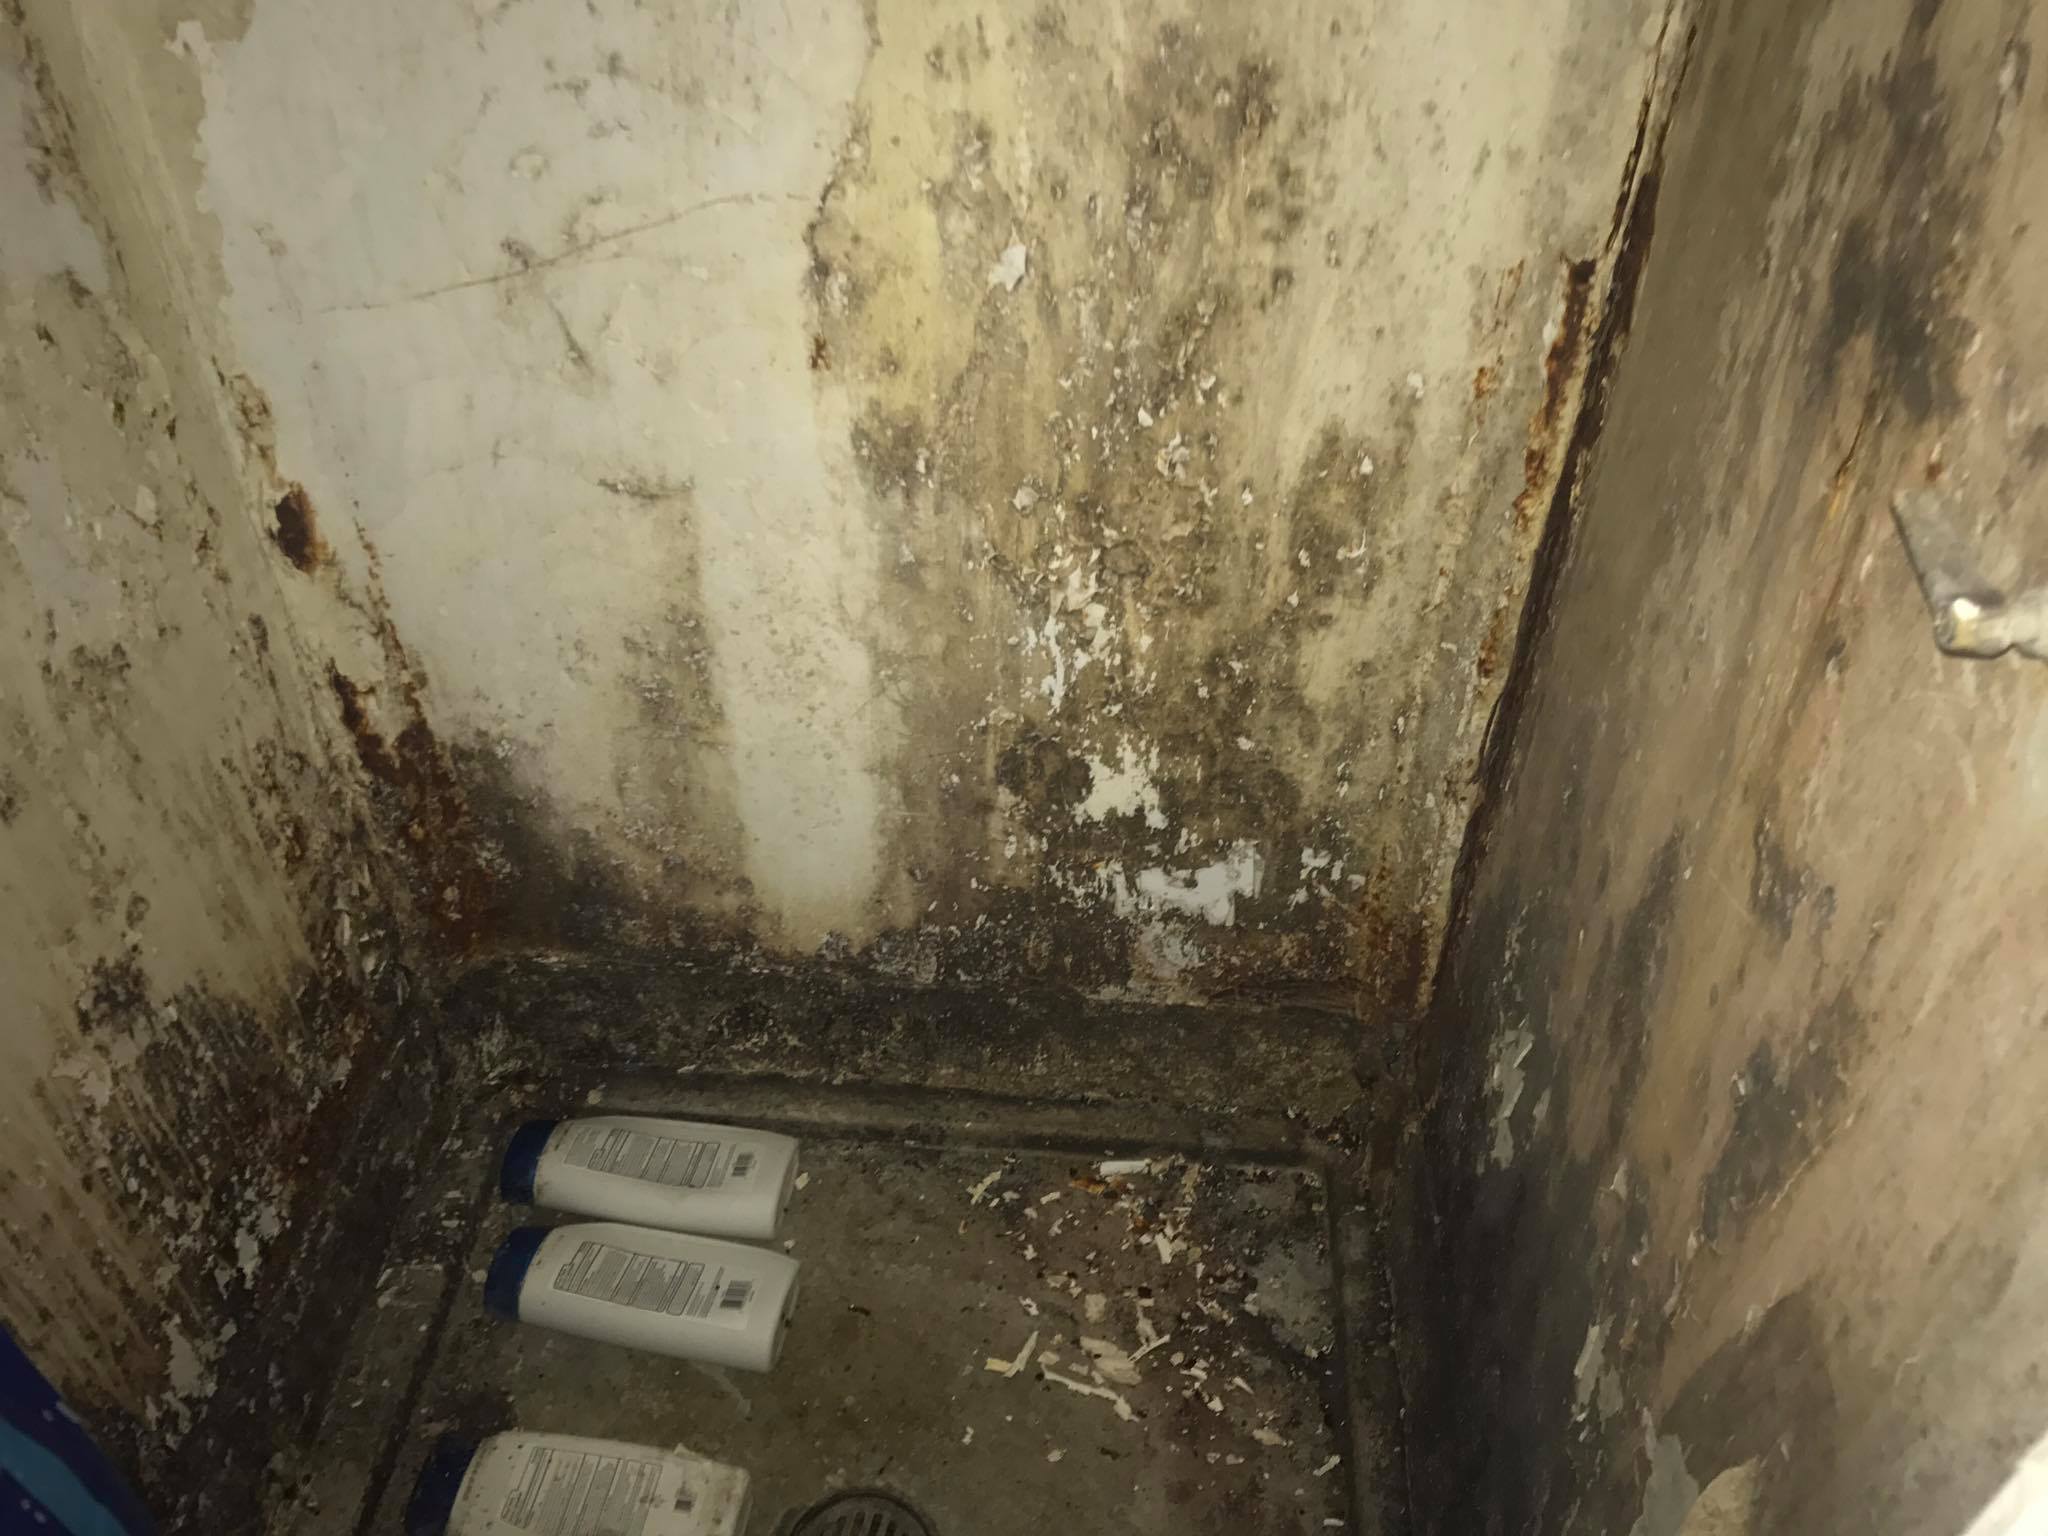 MOLD TOX Testing & Remediation, LLC 1510 US-25 E, Bean Station Tennessee 37708